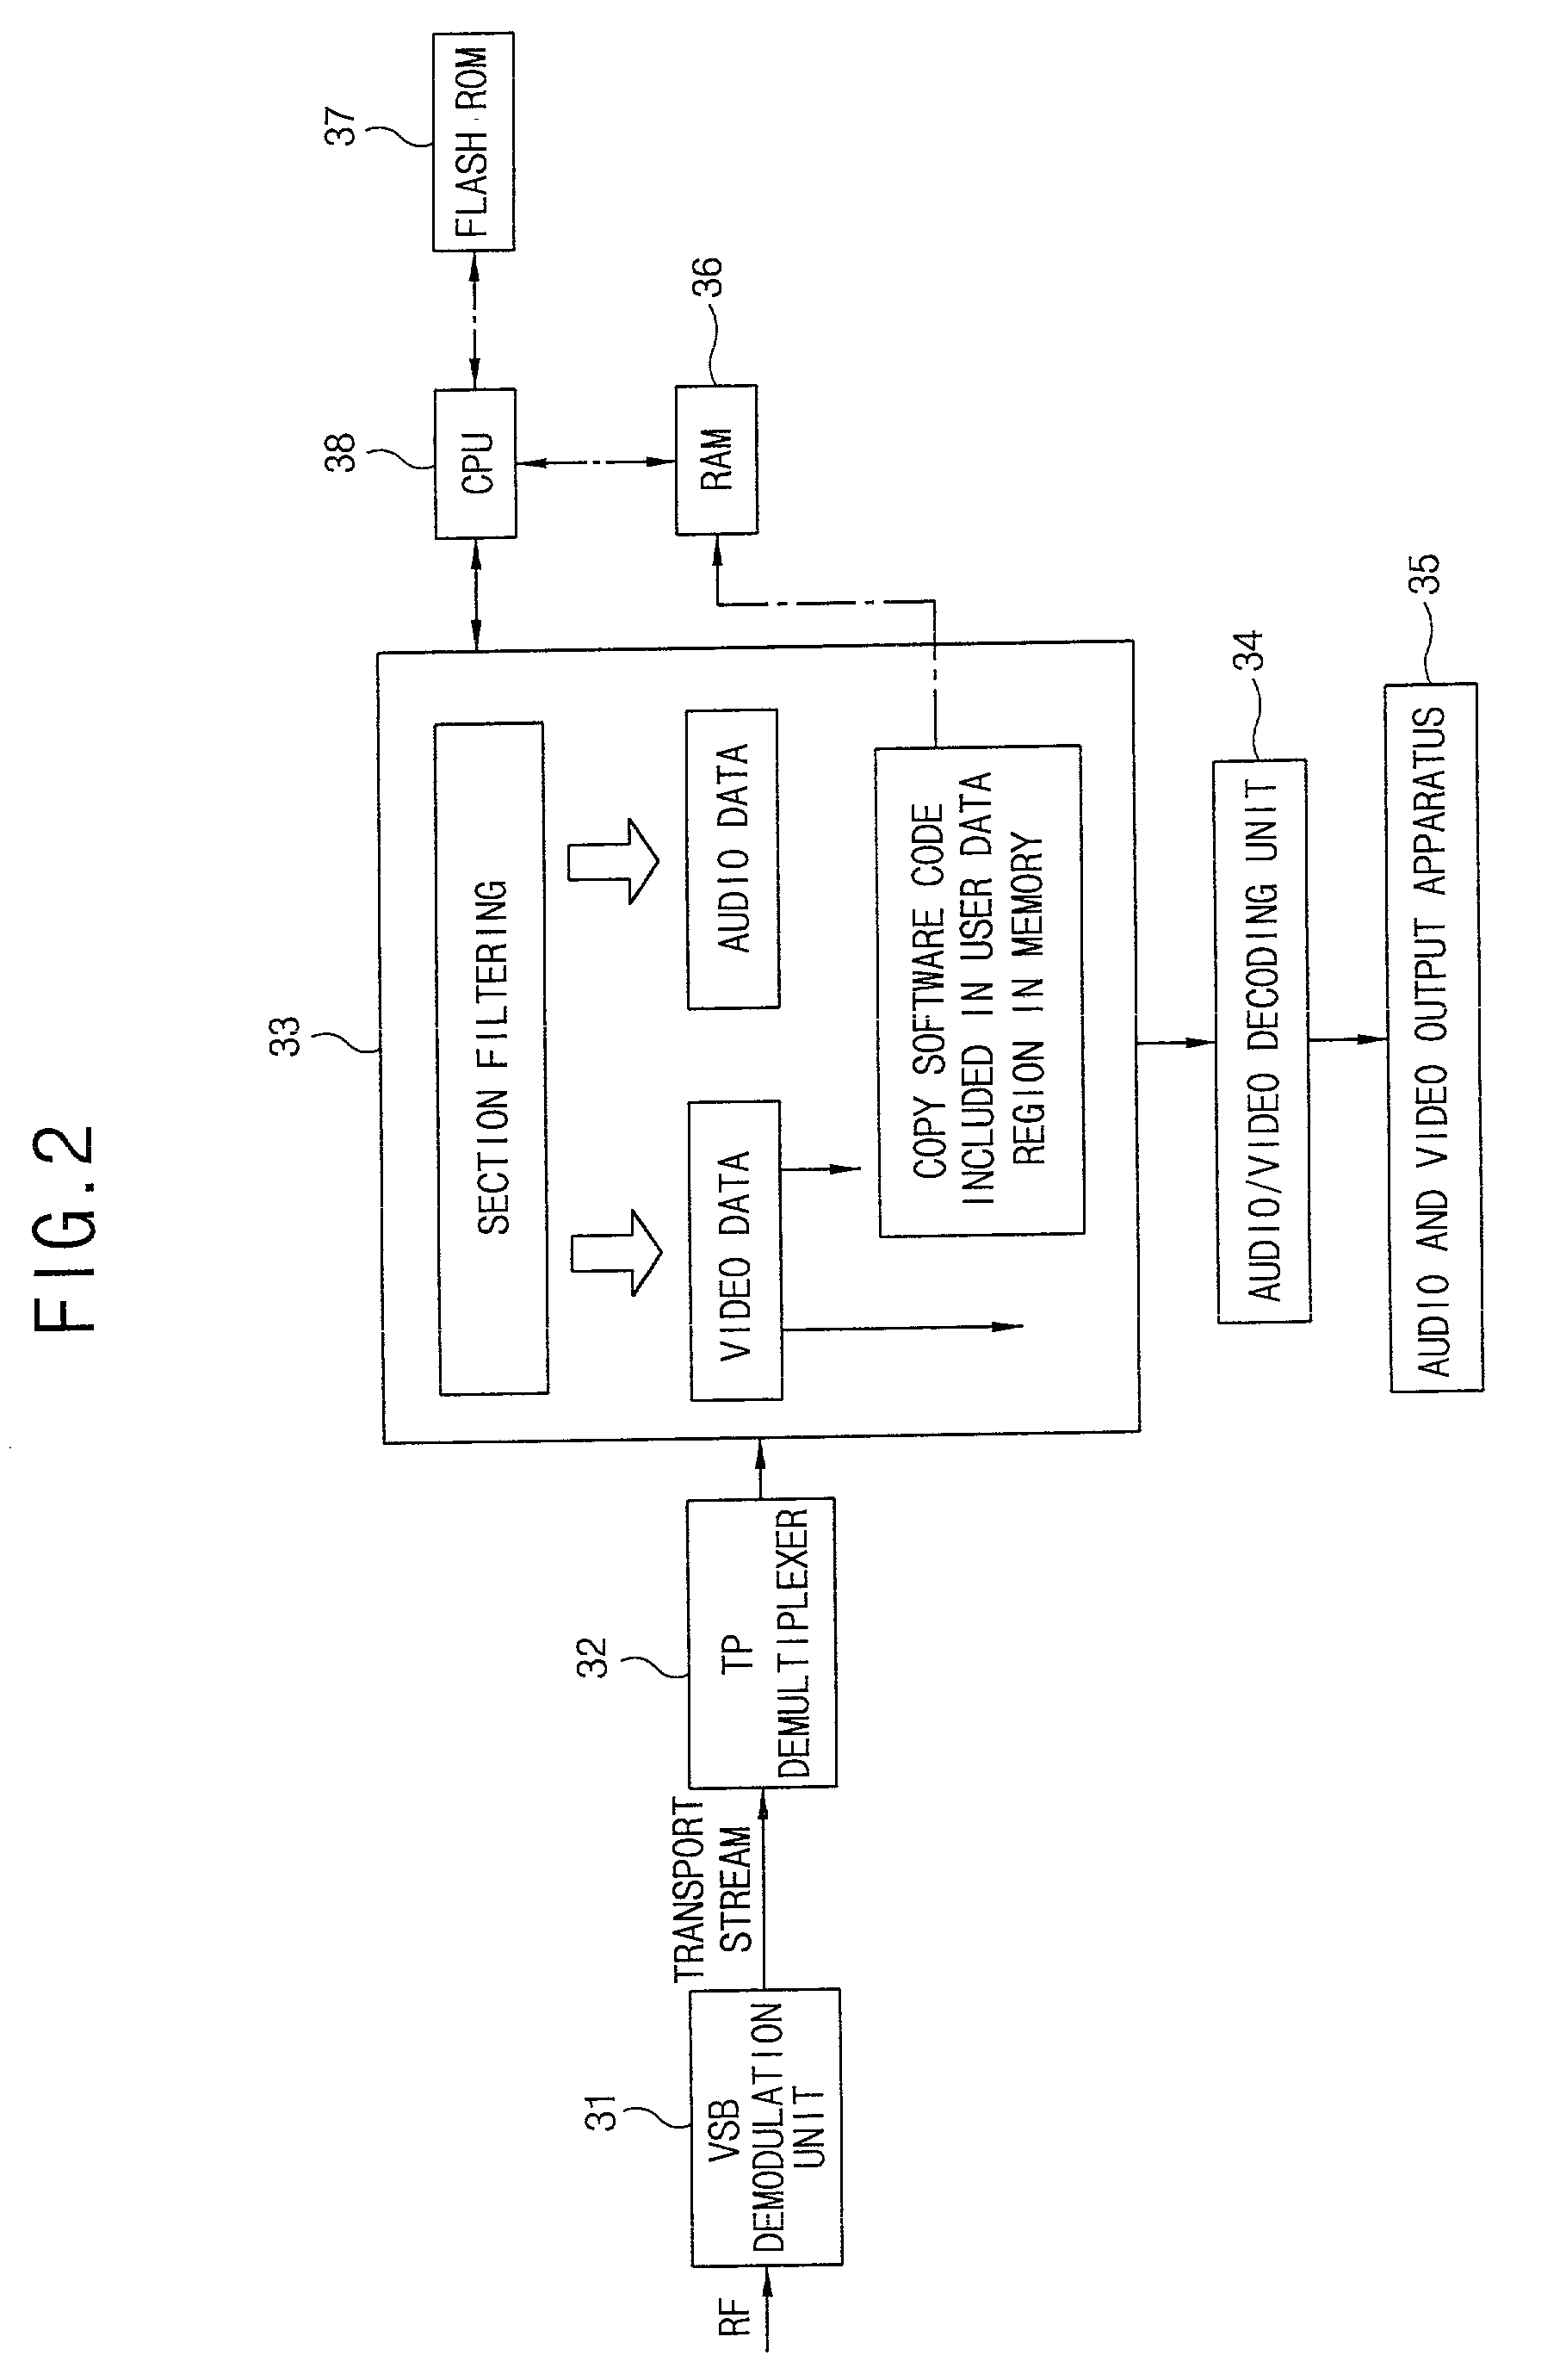 Apparatus and method for upgrading software